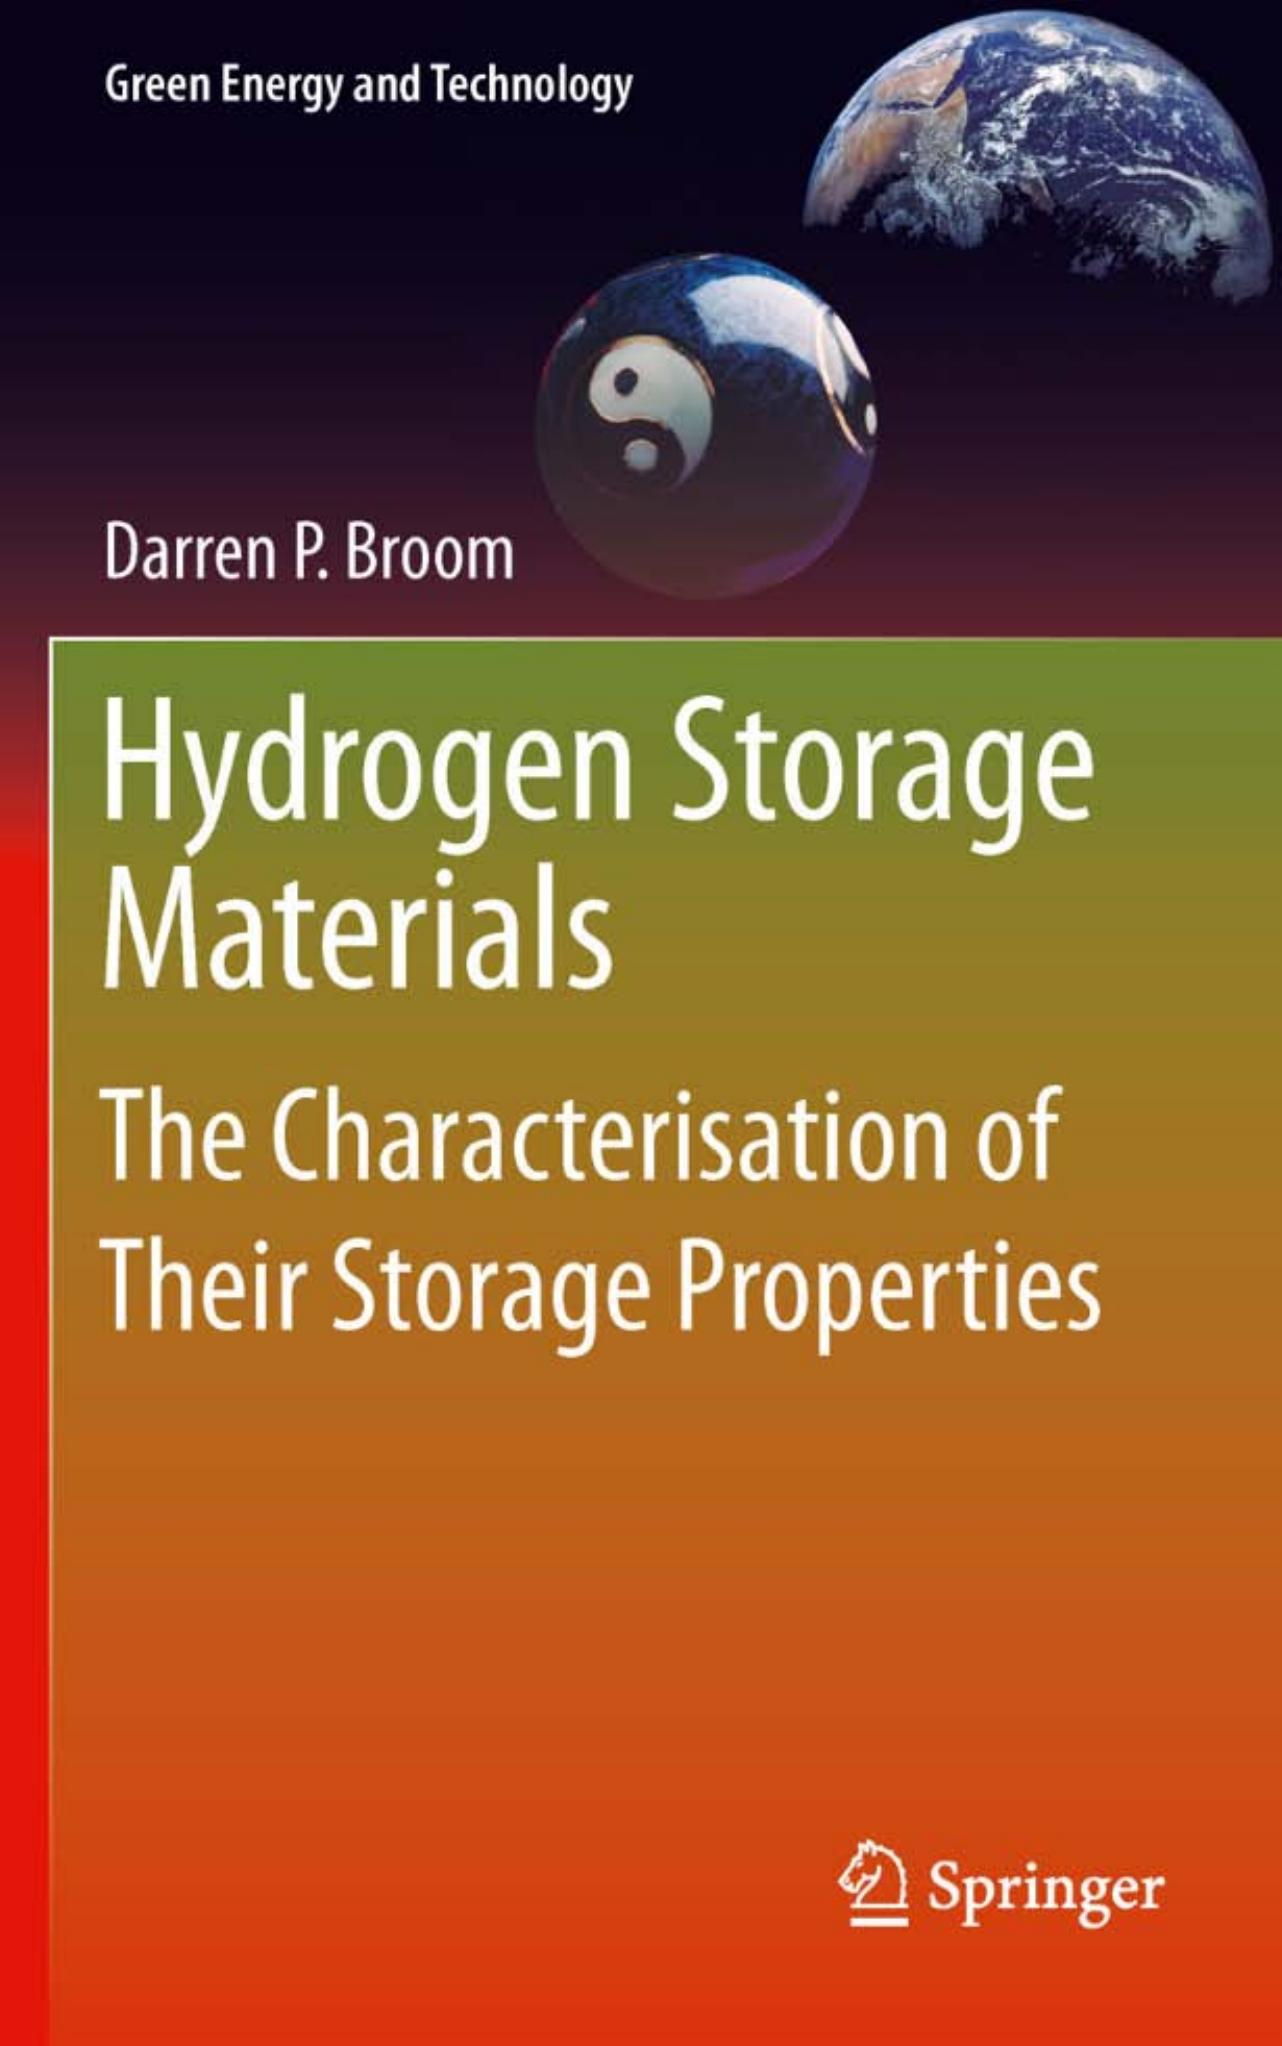 Hydrogen Storage Materials: The Characterisation of Their Storage Properties (Green Energy and Technology) by Darren P. Broom